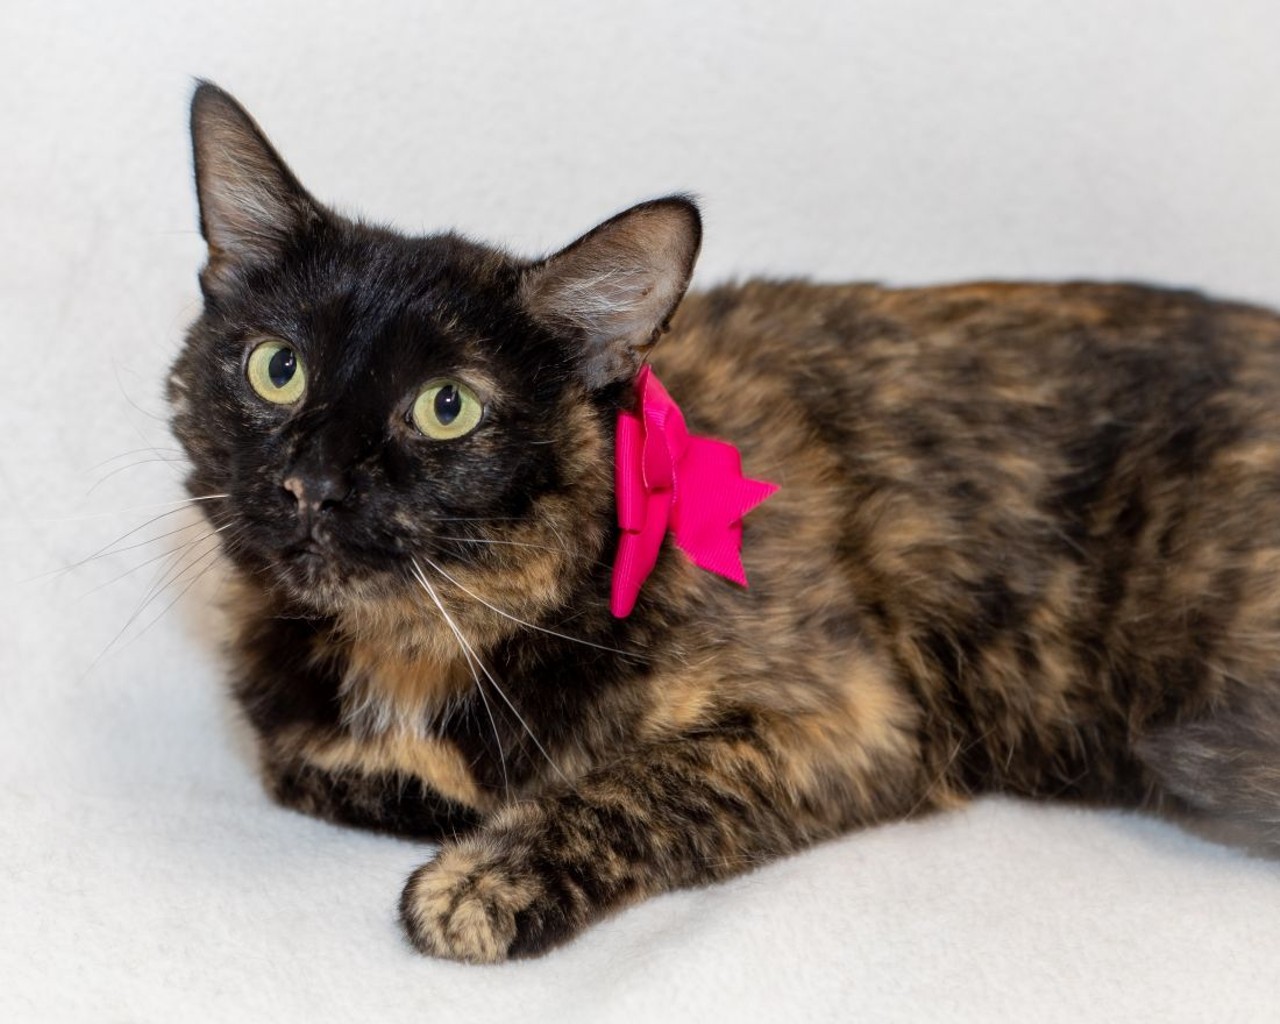 NAME:  Bear 
GENDER: Female 
BREED: Domestic Short Hair 
AGE: 4 years, 1 month 
WEIGHT: 7 pounds
SPECIAL CONSIDERATIONS: Bear may prefer a home with older or no children.
REASON I CAME TO MHS: Owner surrender 
LOCATION: Petco of Sterling Heights 
ID NUMBER: 870396 